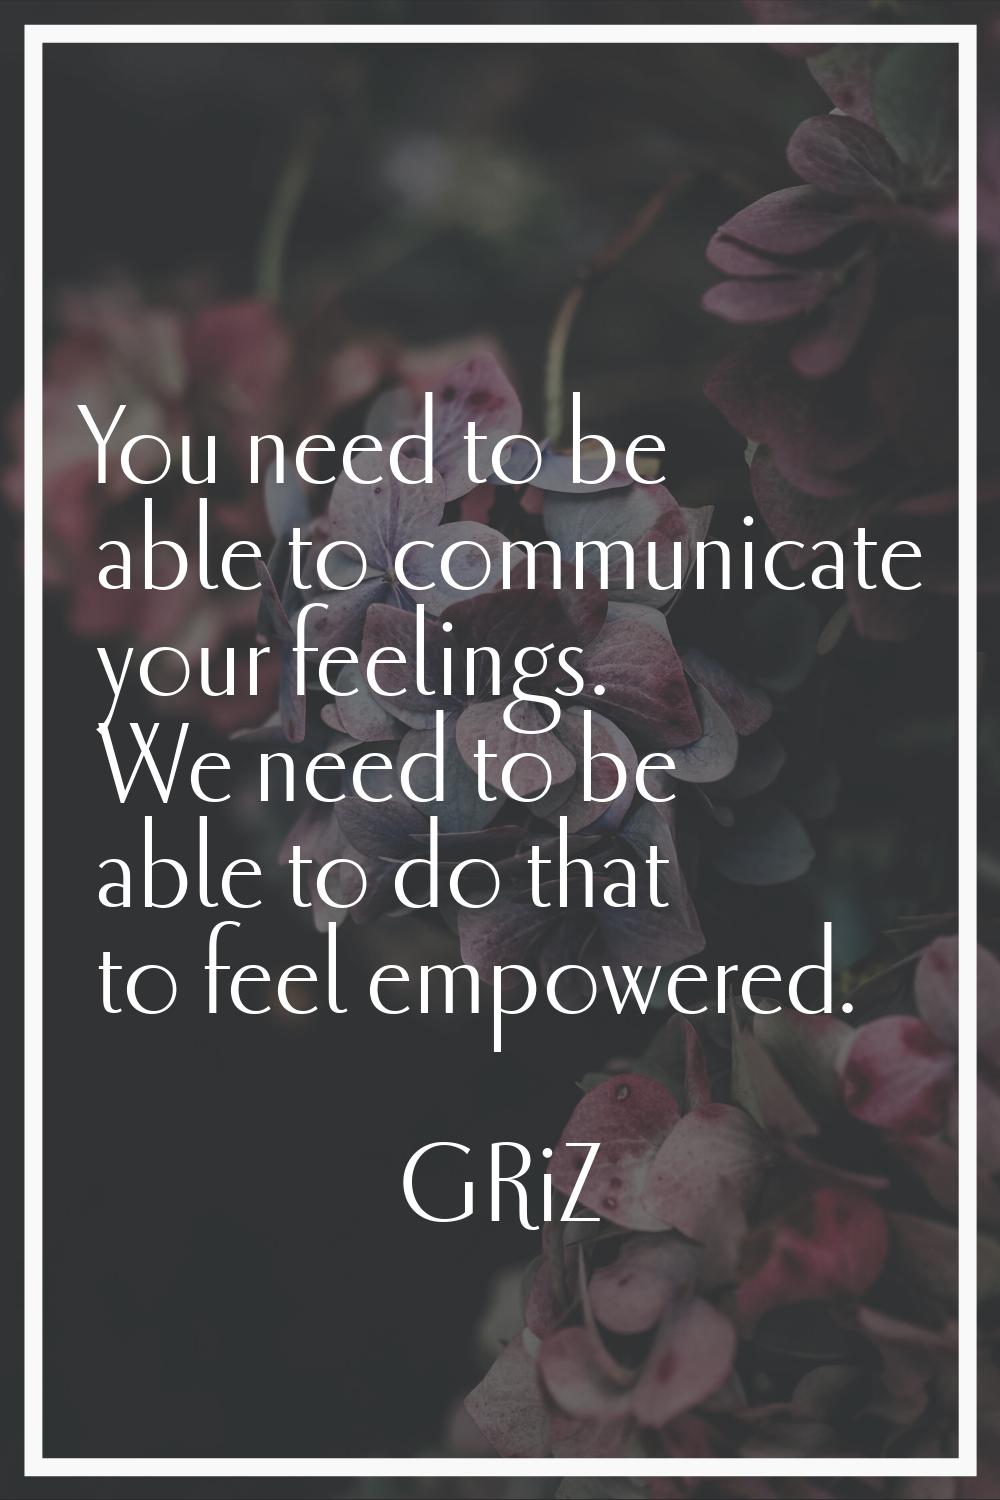 You need to be able to communicate your feelings. We need to be able to do that to feel empowered.